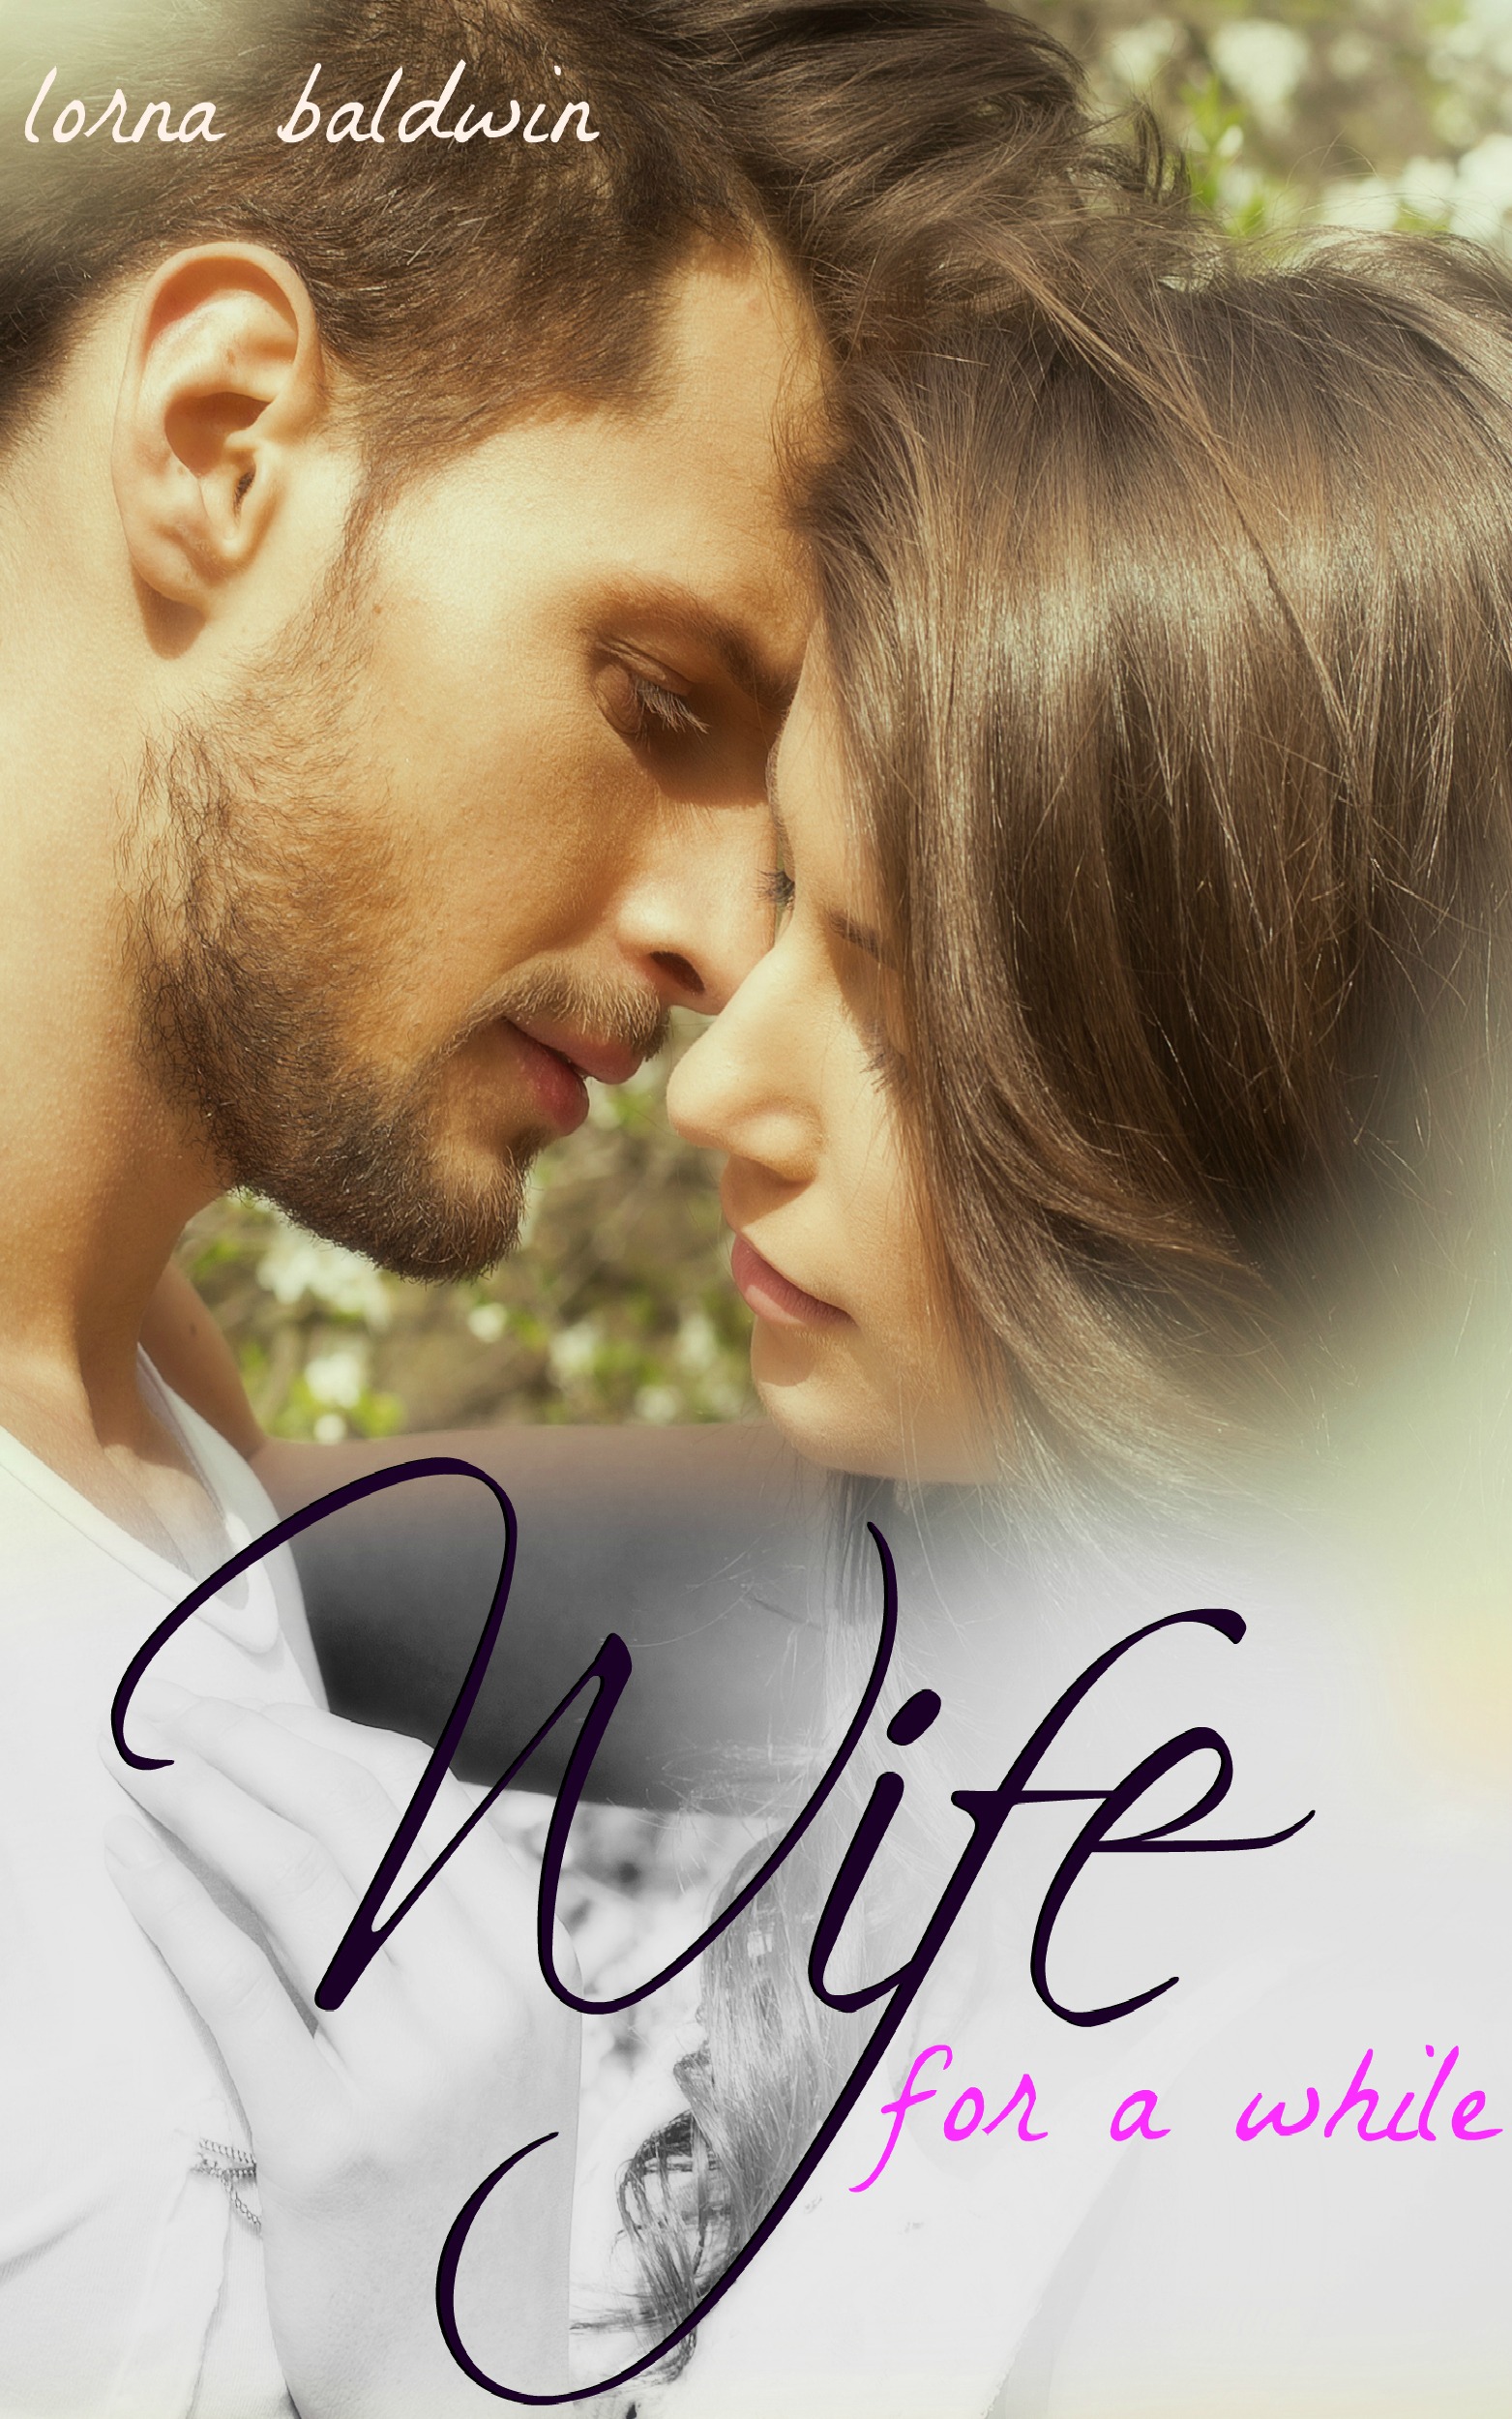 FREE: Wife for a While by Lorna Baldwin